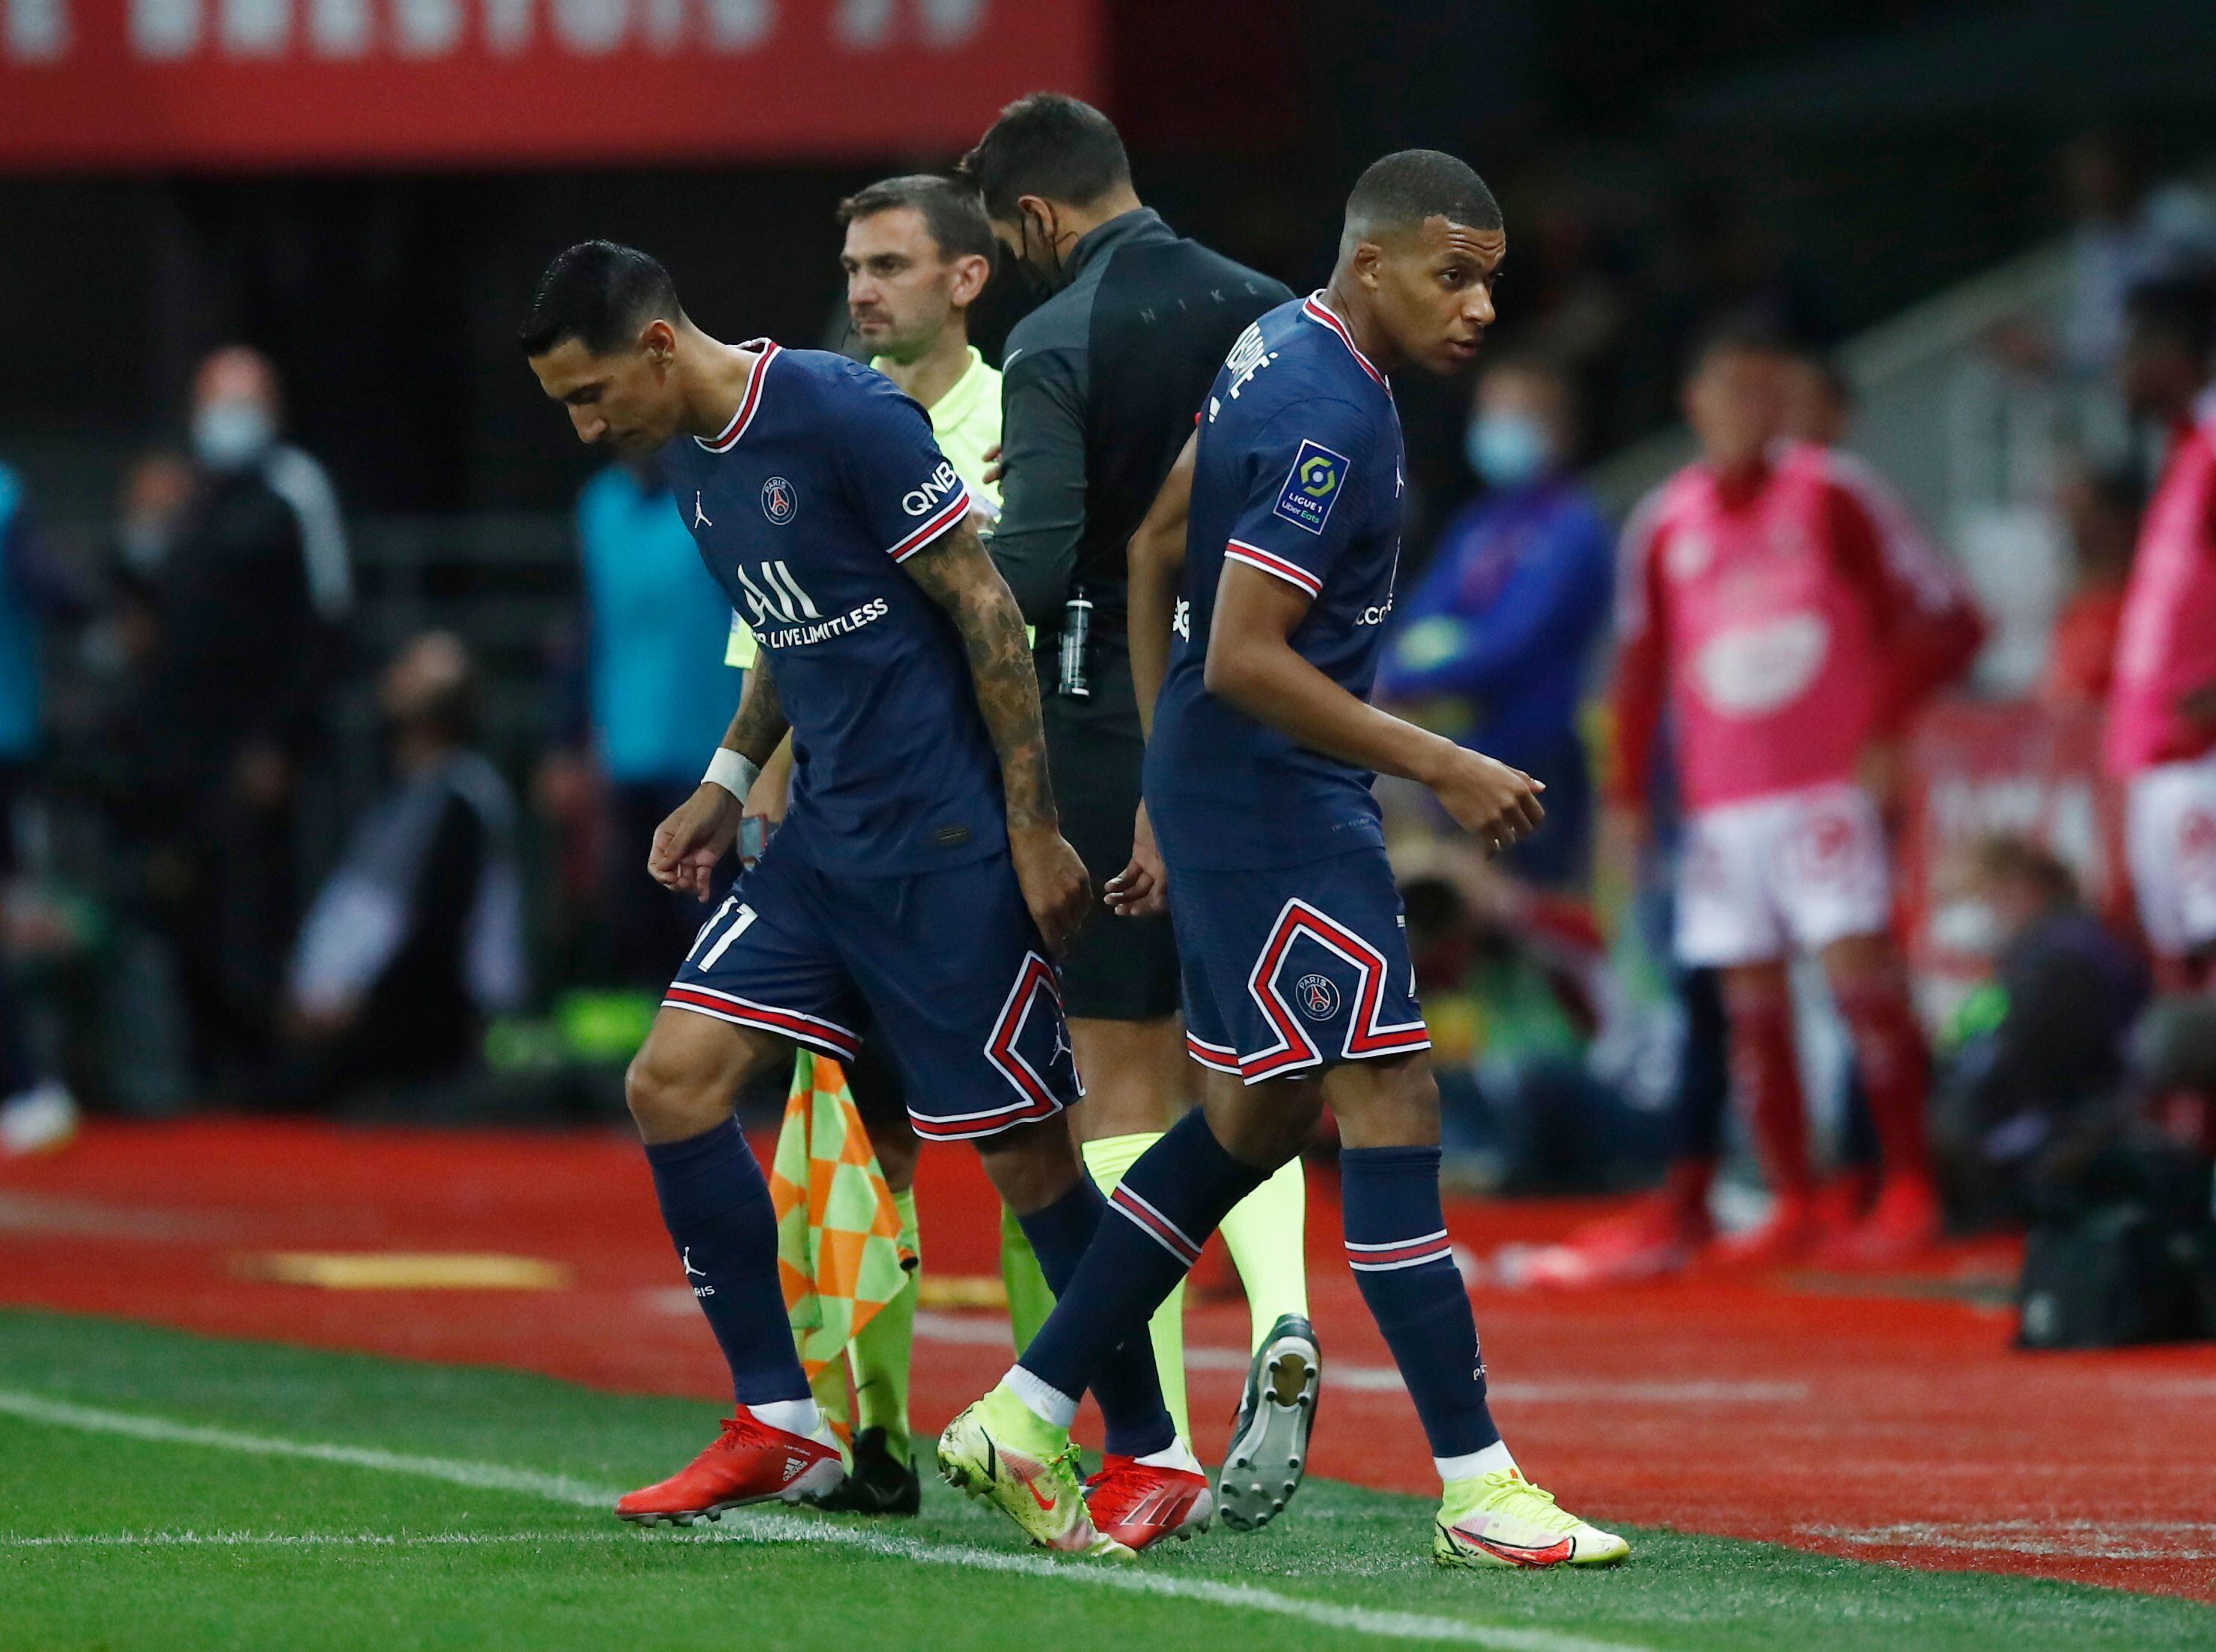 Di María spoke of the future of Mbappé in Paris (REUTERS / Stephane Mahe)